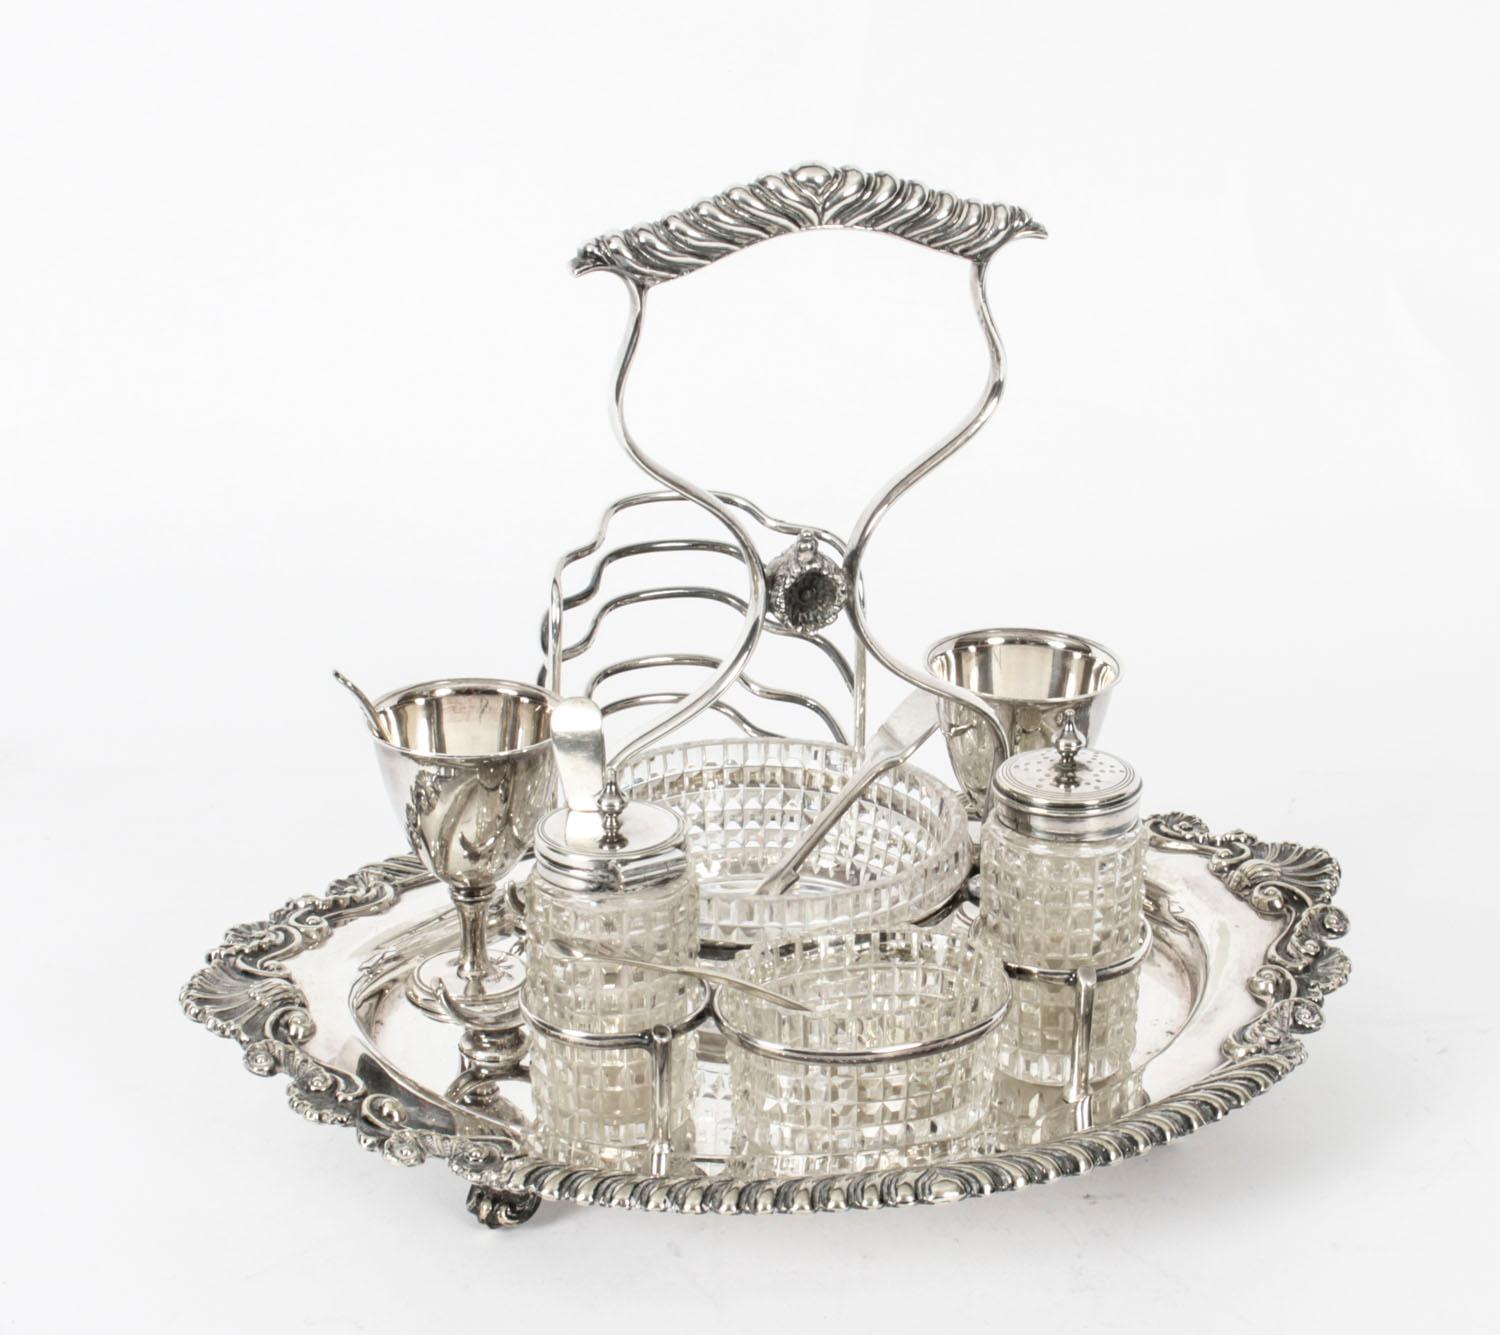 Antique Victorian Silver Plated Breakfast Set Toast Rack, 19th Century 10